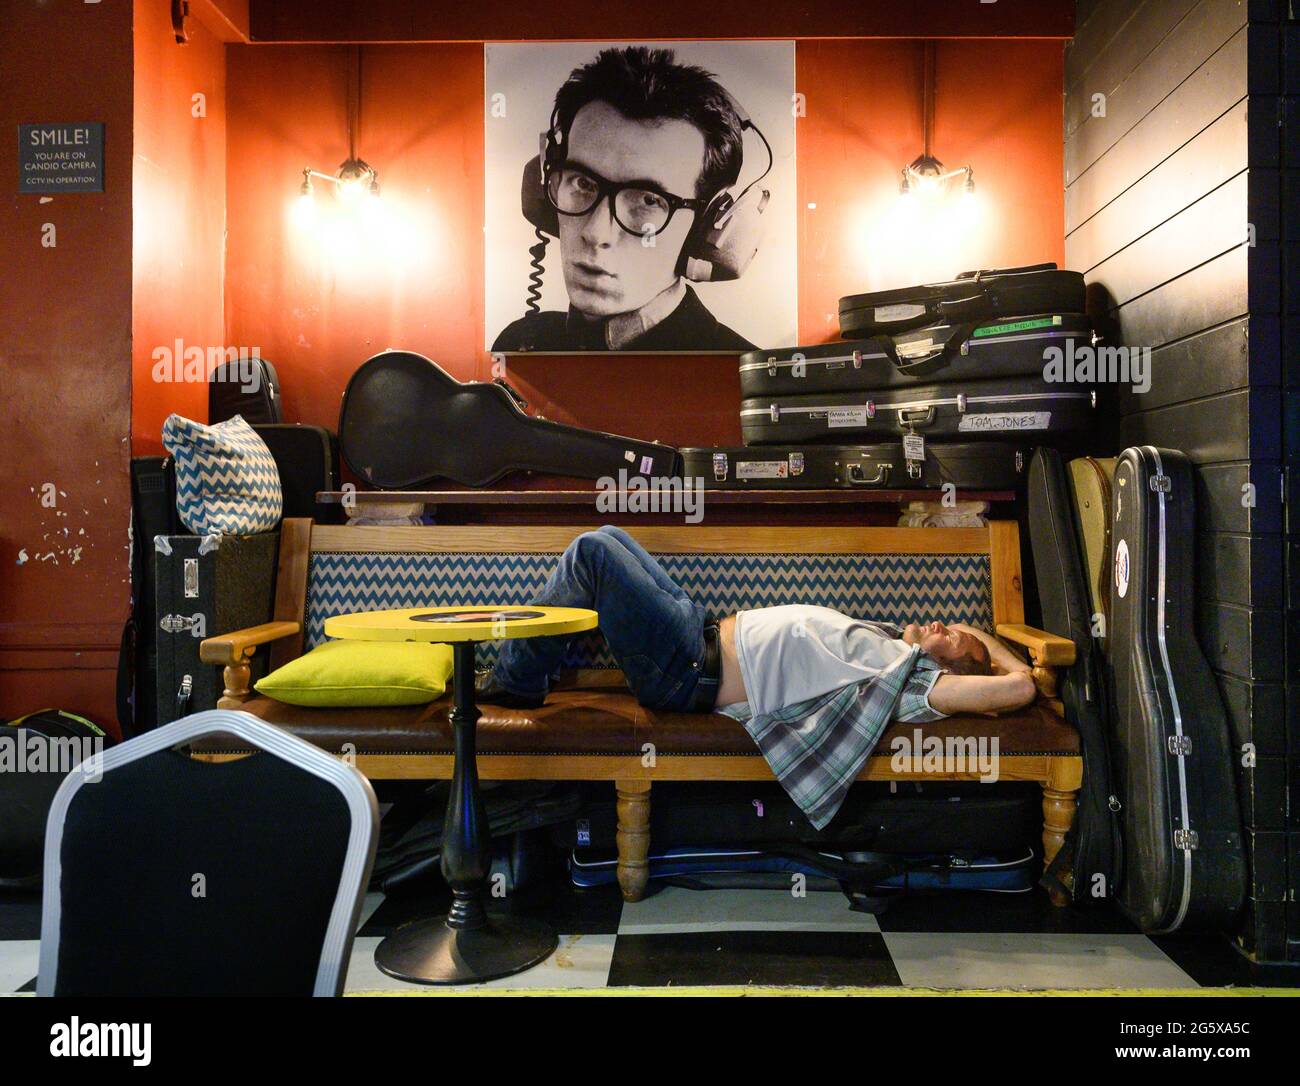 Band member of Los Pacaminos asleep under pic of Elvis Costello after live music gig at London Half Moon Putney pub. Stock Photo